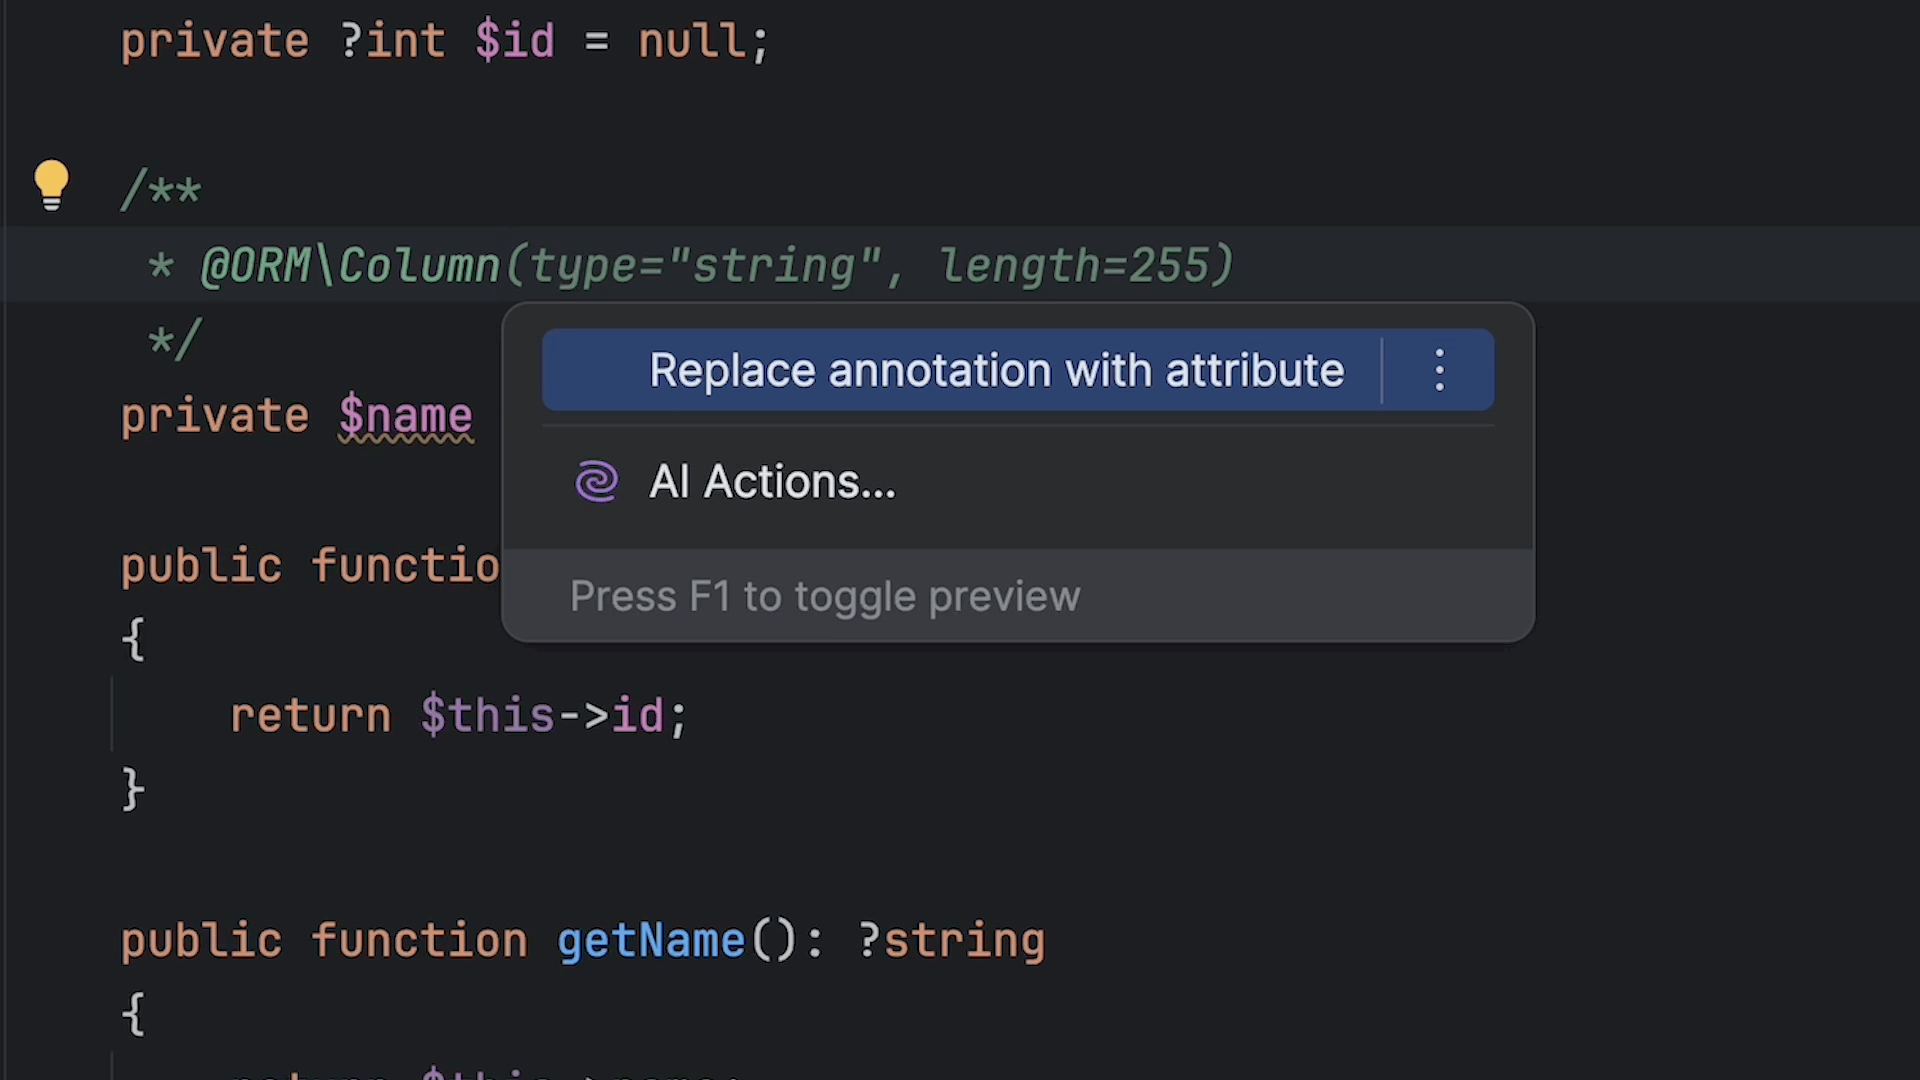 Conversion of annotations to attributes for Symfony and Doctrine